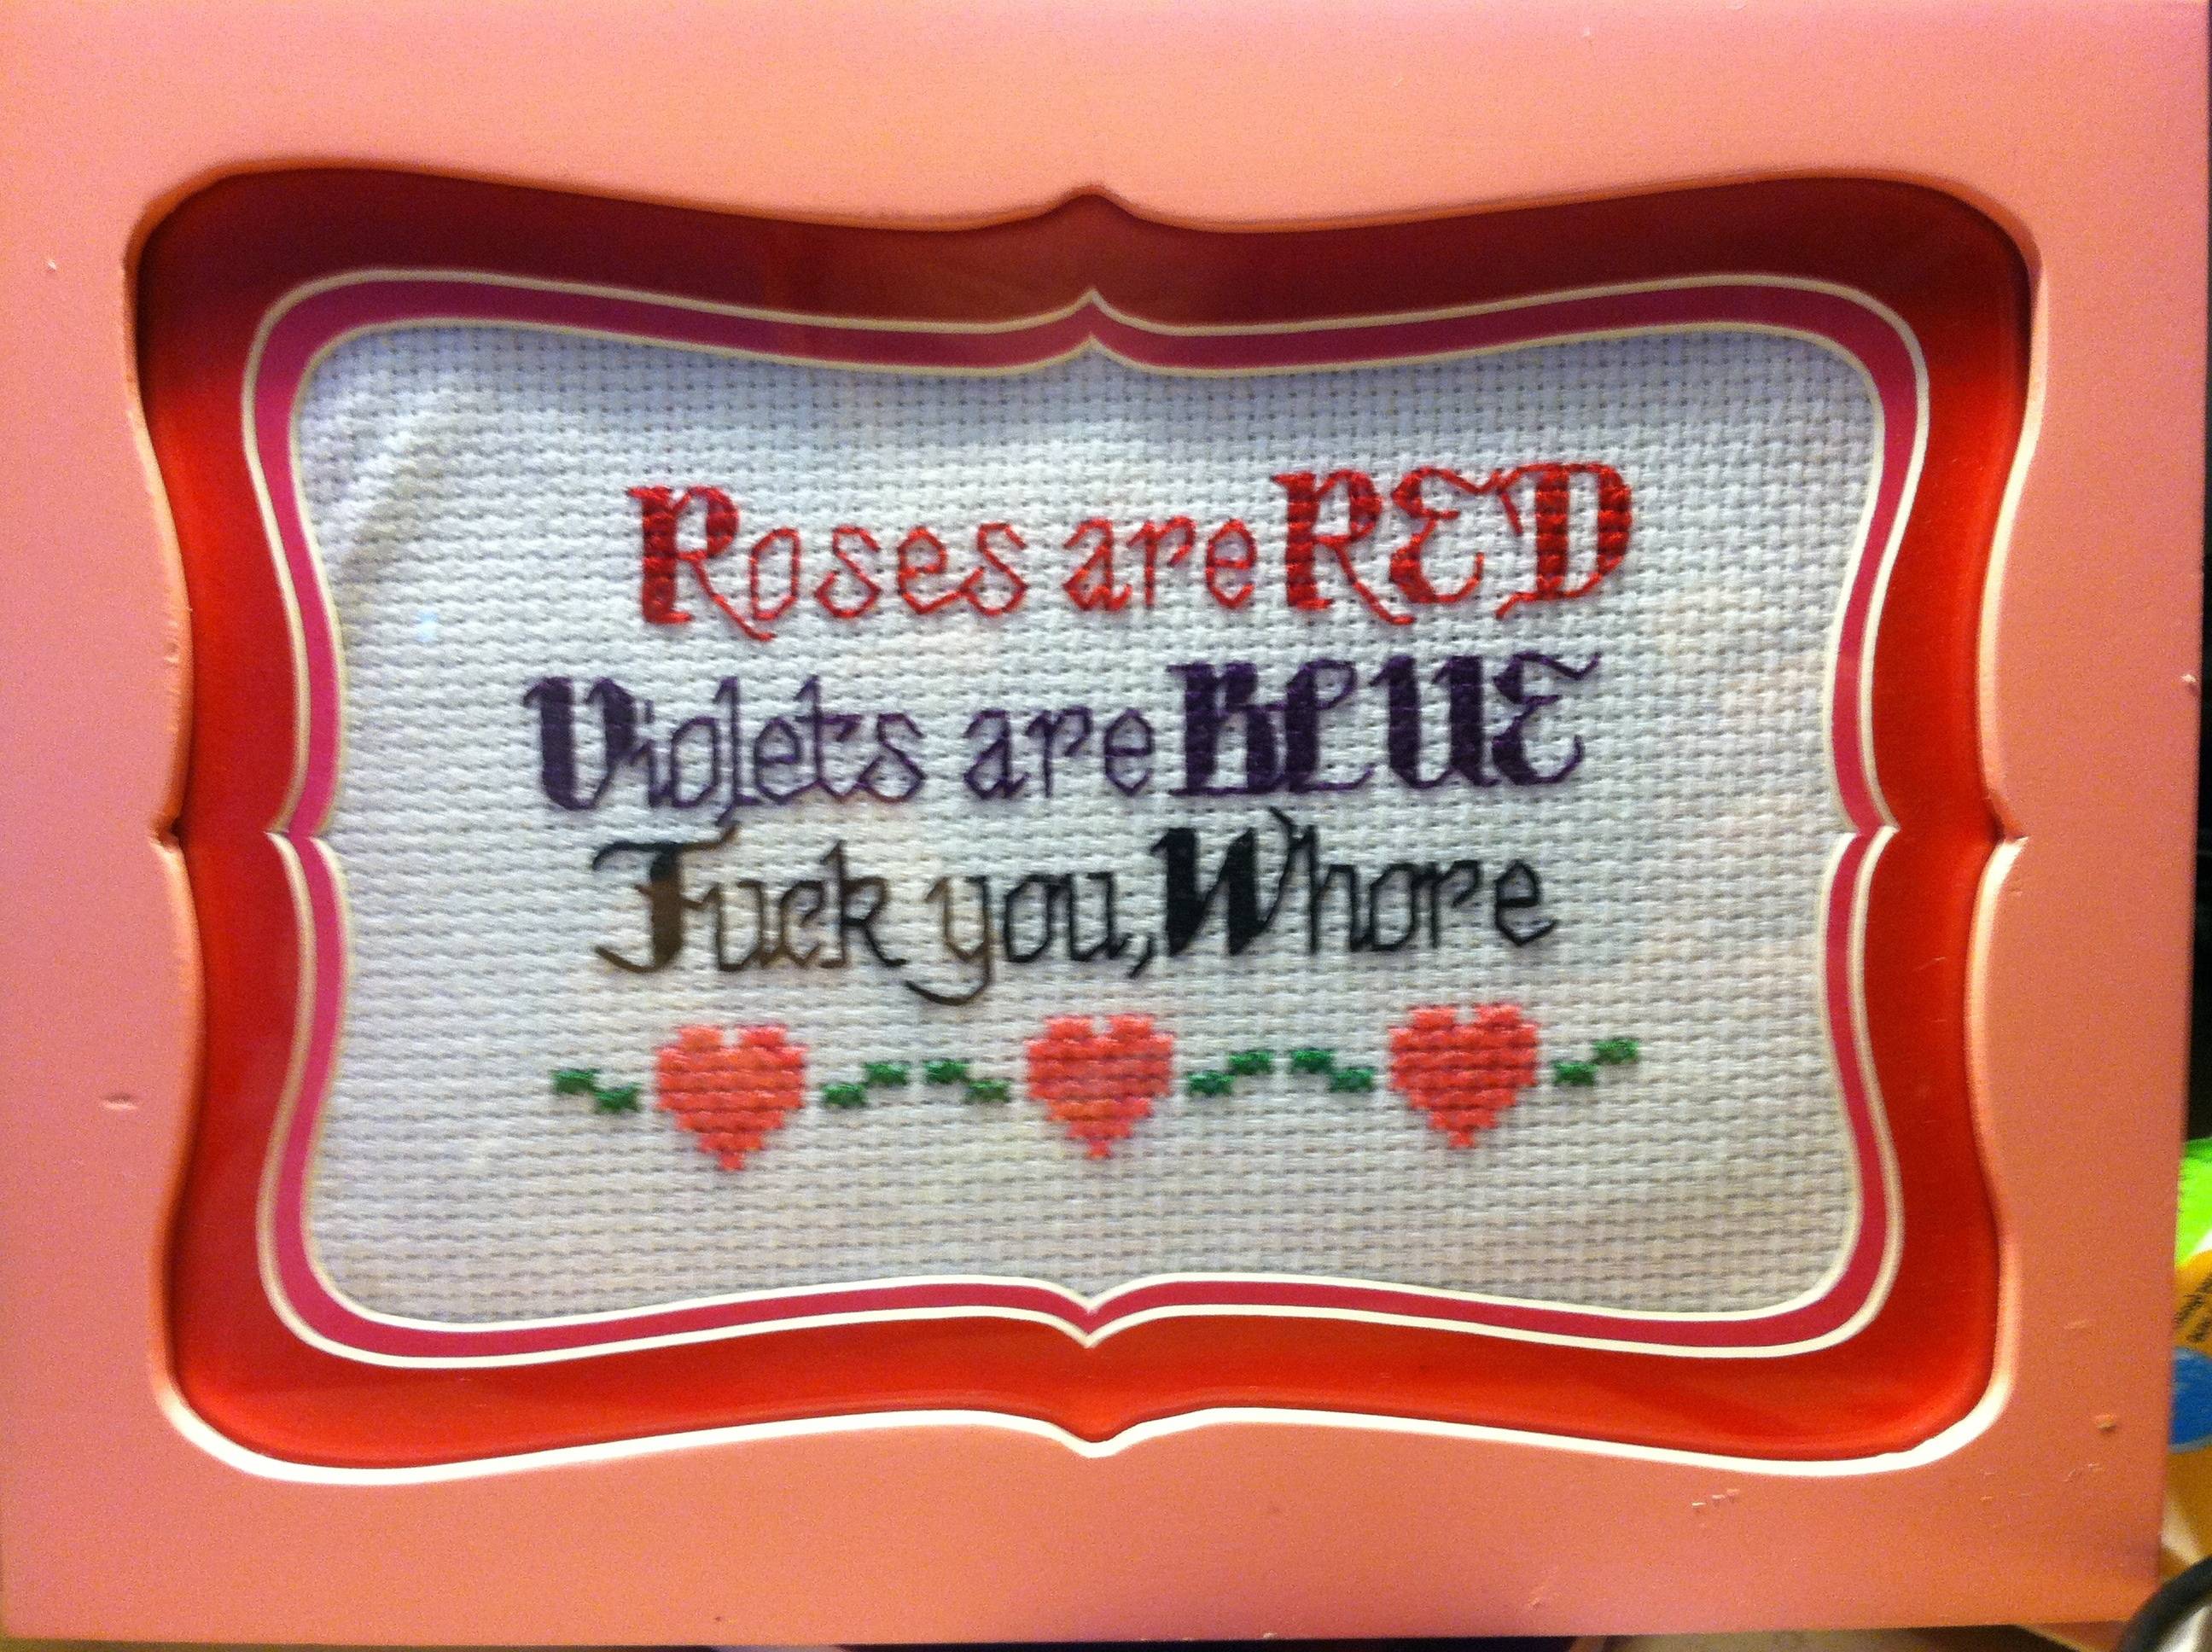 happy valentines day whore - Roses are R&D Violets are Blue Fuck you, Whore